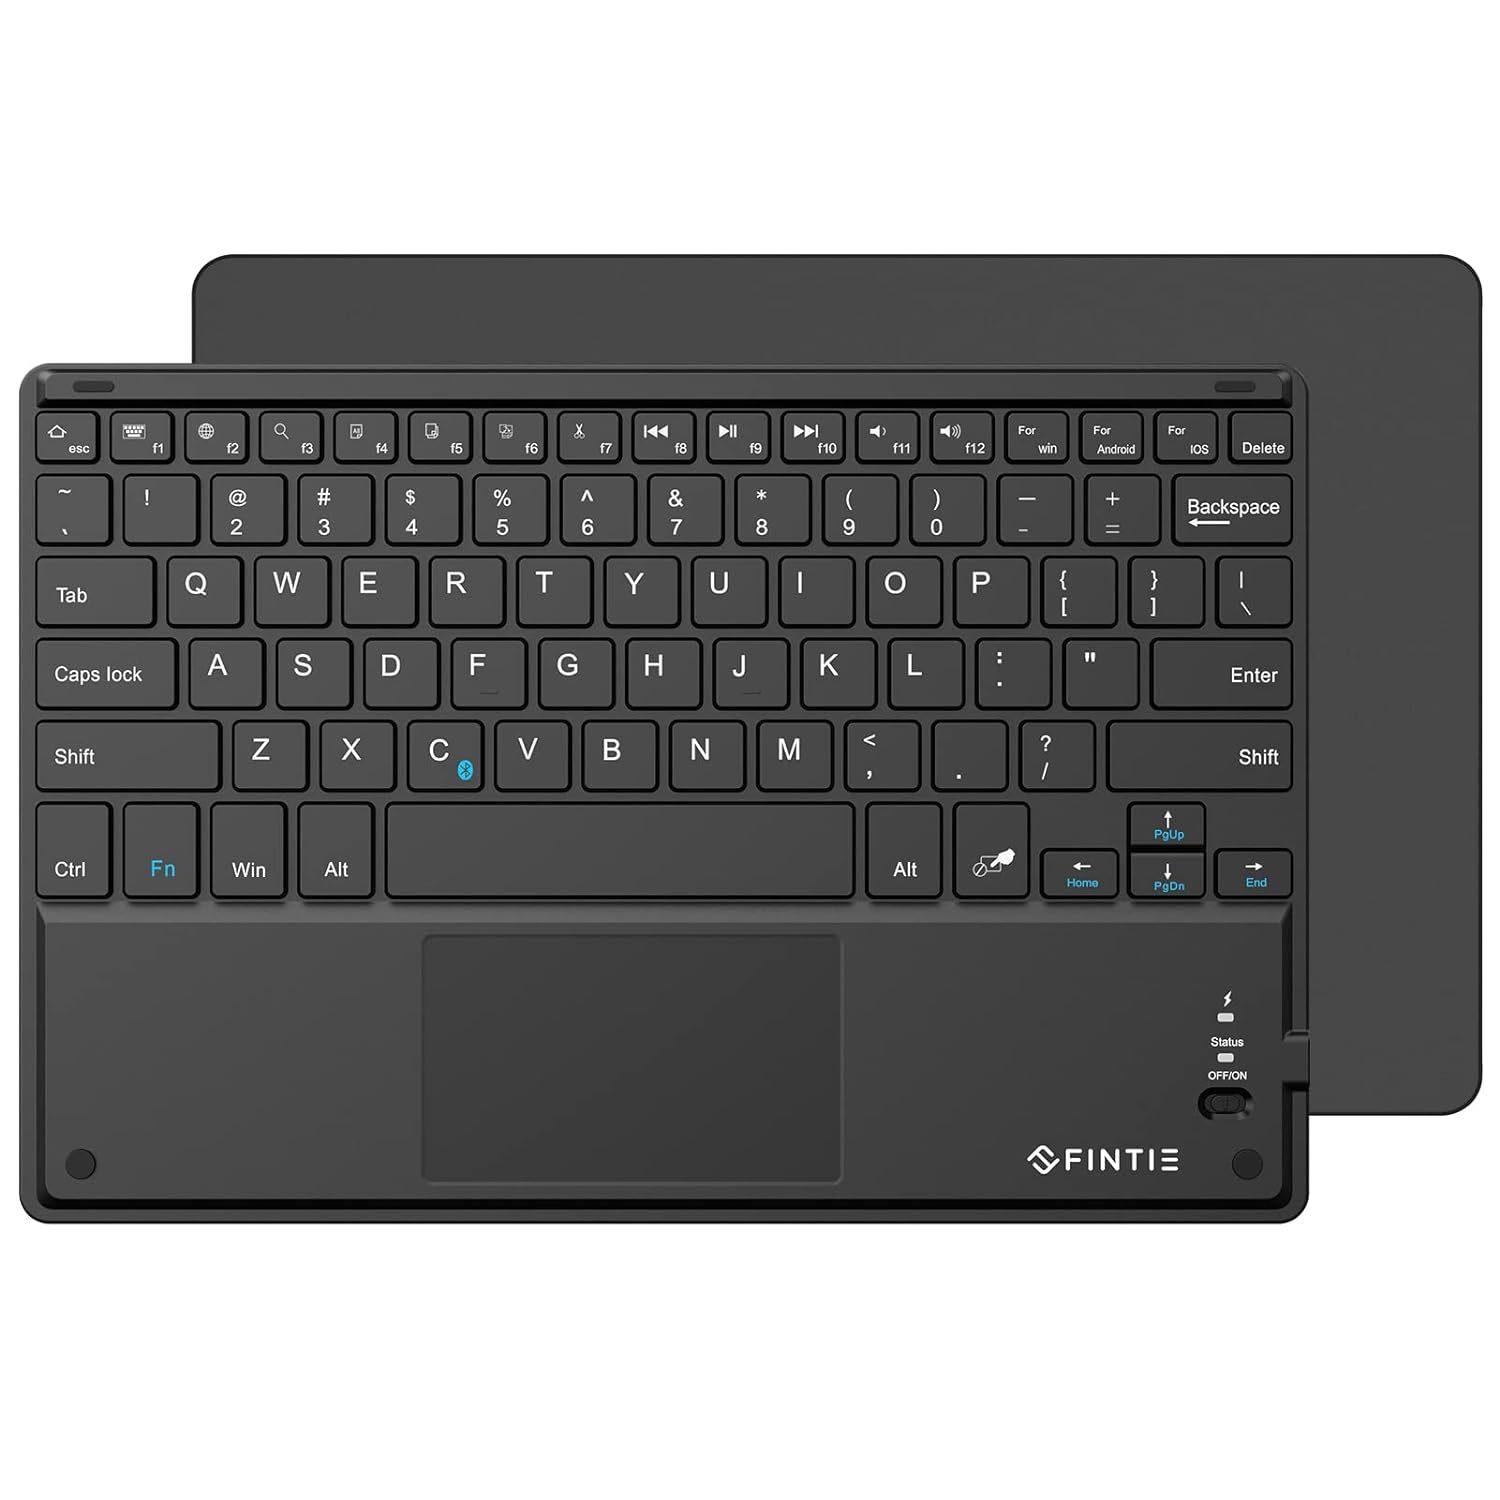 Fintie Ultrathin 4mm Wireless Bluetooth Keyboard with Built-in Multi-Touch Touch - $45.99